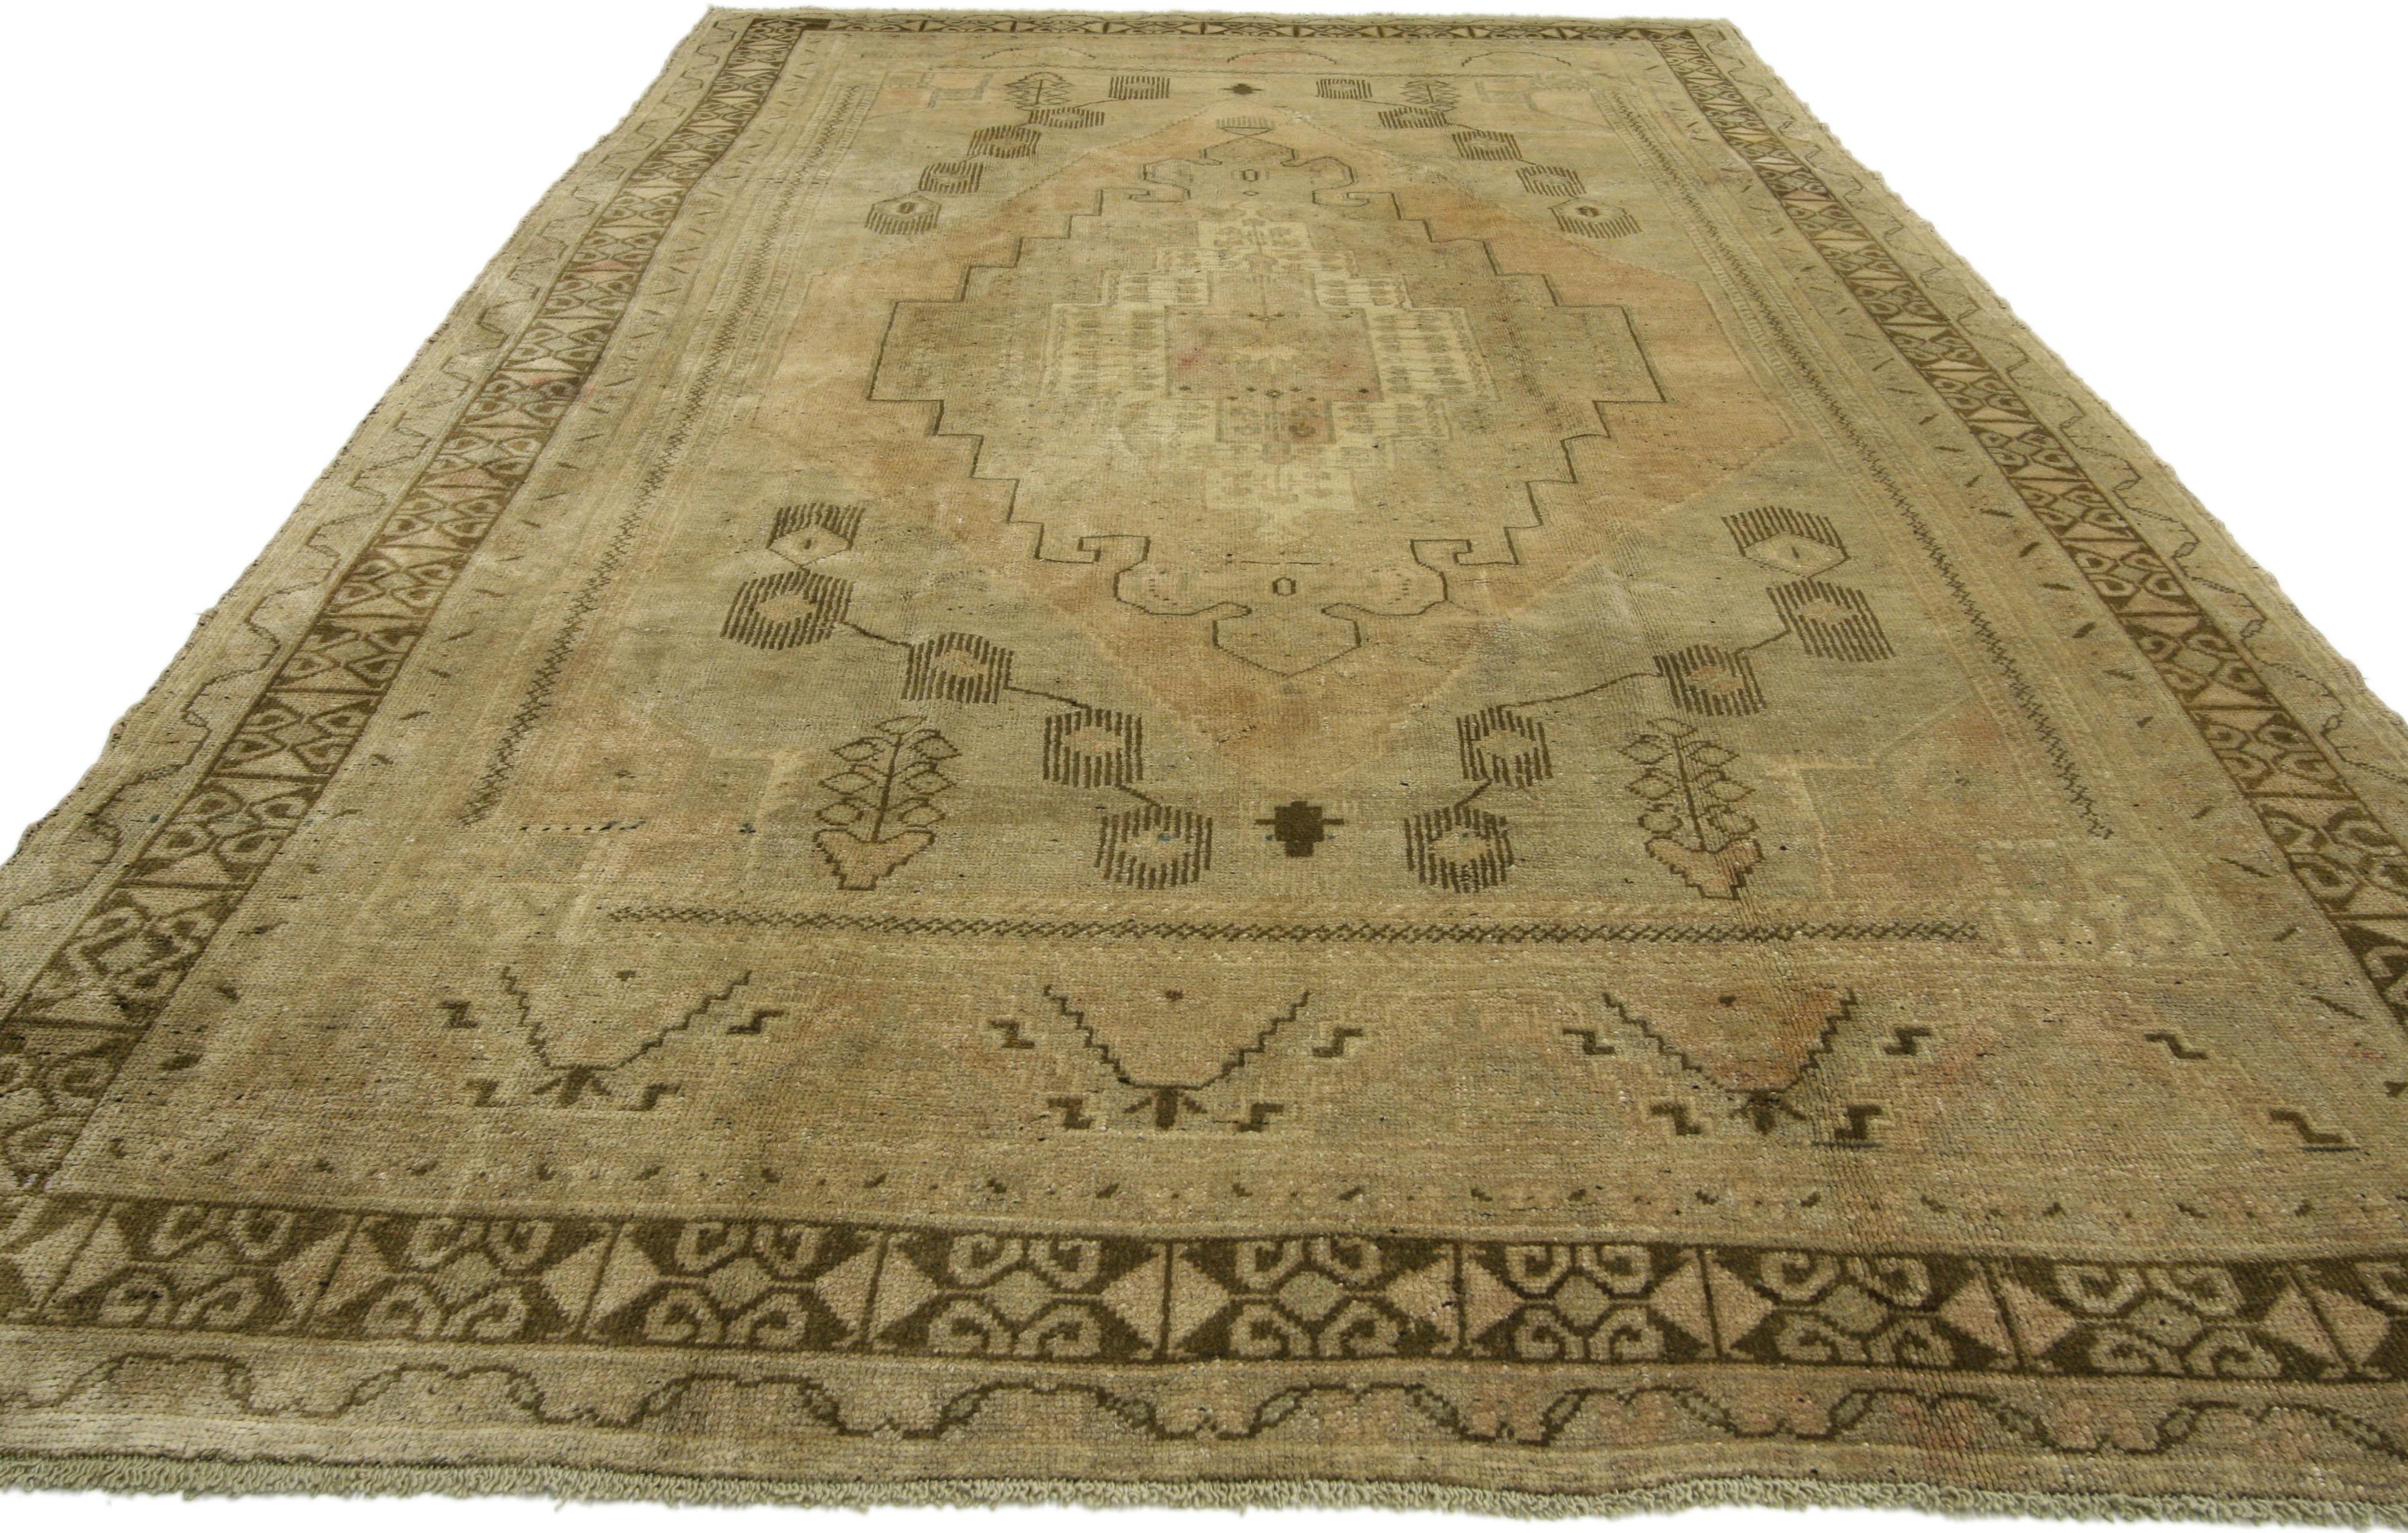 50518, vintage Turkish Oushak rug with earthy rustic style, hallway runner 06'00 x 10'06. Earthy rustic style meets refined elegance. This hand knotted wool vintage Turkish Oushak rug features a large-scale stepped medallion with trefoil tips on